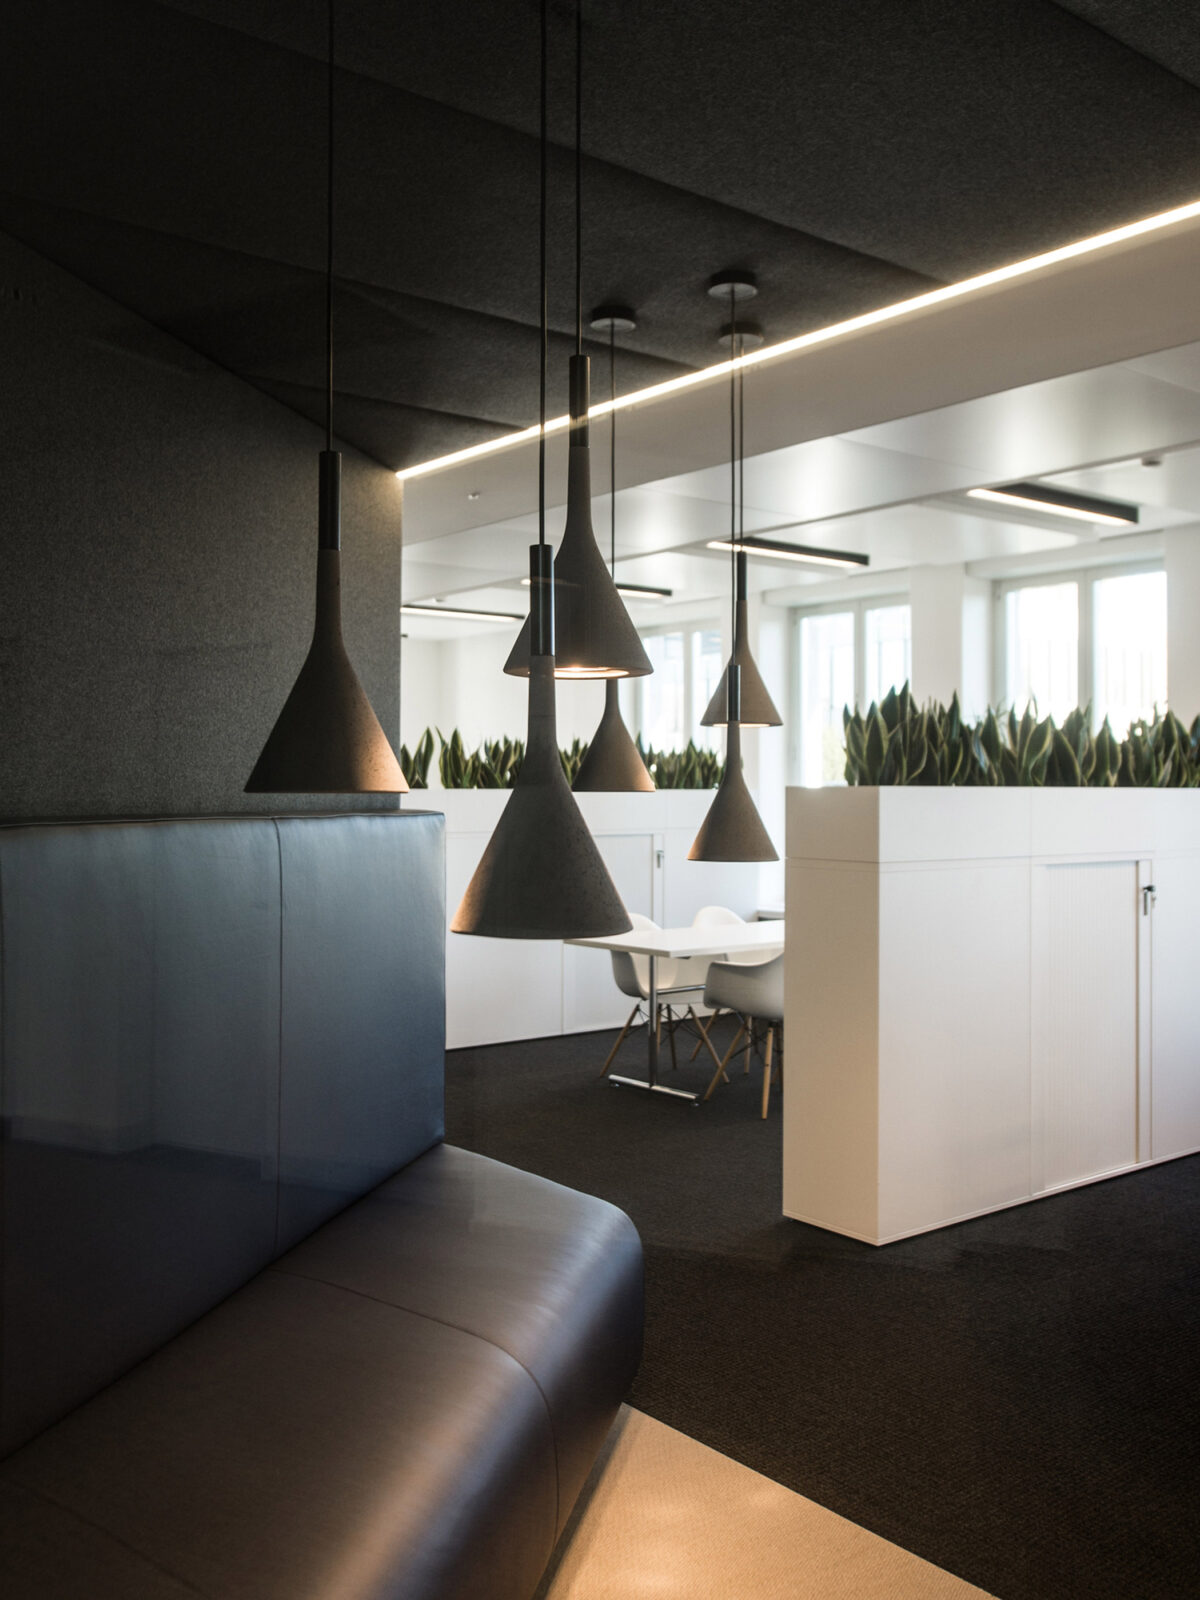 Minimalist office space with sleek, monochrome furniture. Overhead, cone-shaped pendant lights punctuate the room, complementing the continuous strand of LED strip lighting that frames the ceiling's contours. An expansive planter of verdant greenery breathes life into the otherwise monochromatic palette.